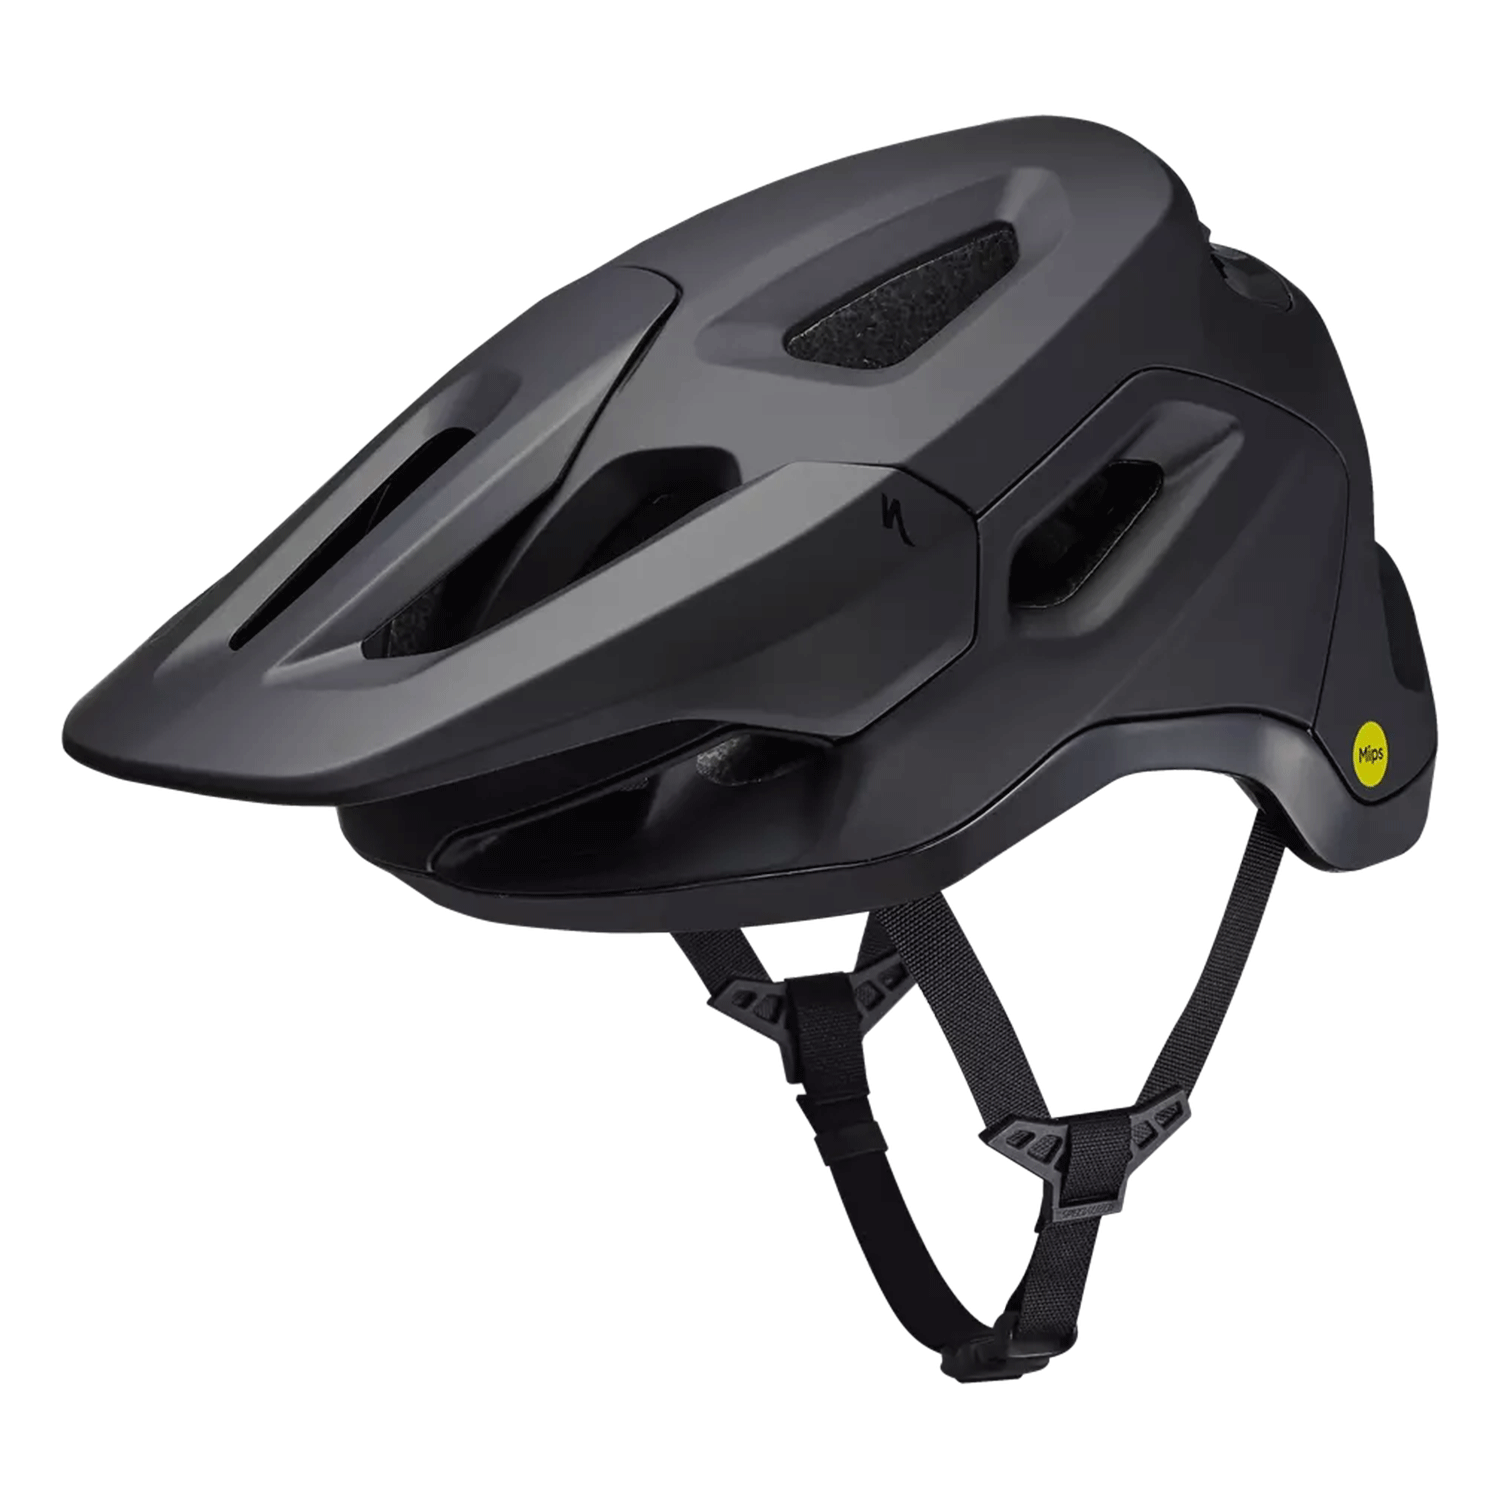 Specialized Tactic 4 Helmet Black – Comor - Go Play Outside